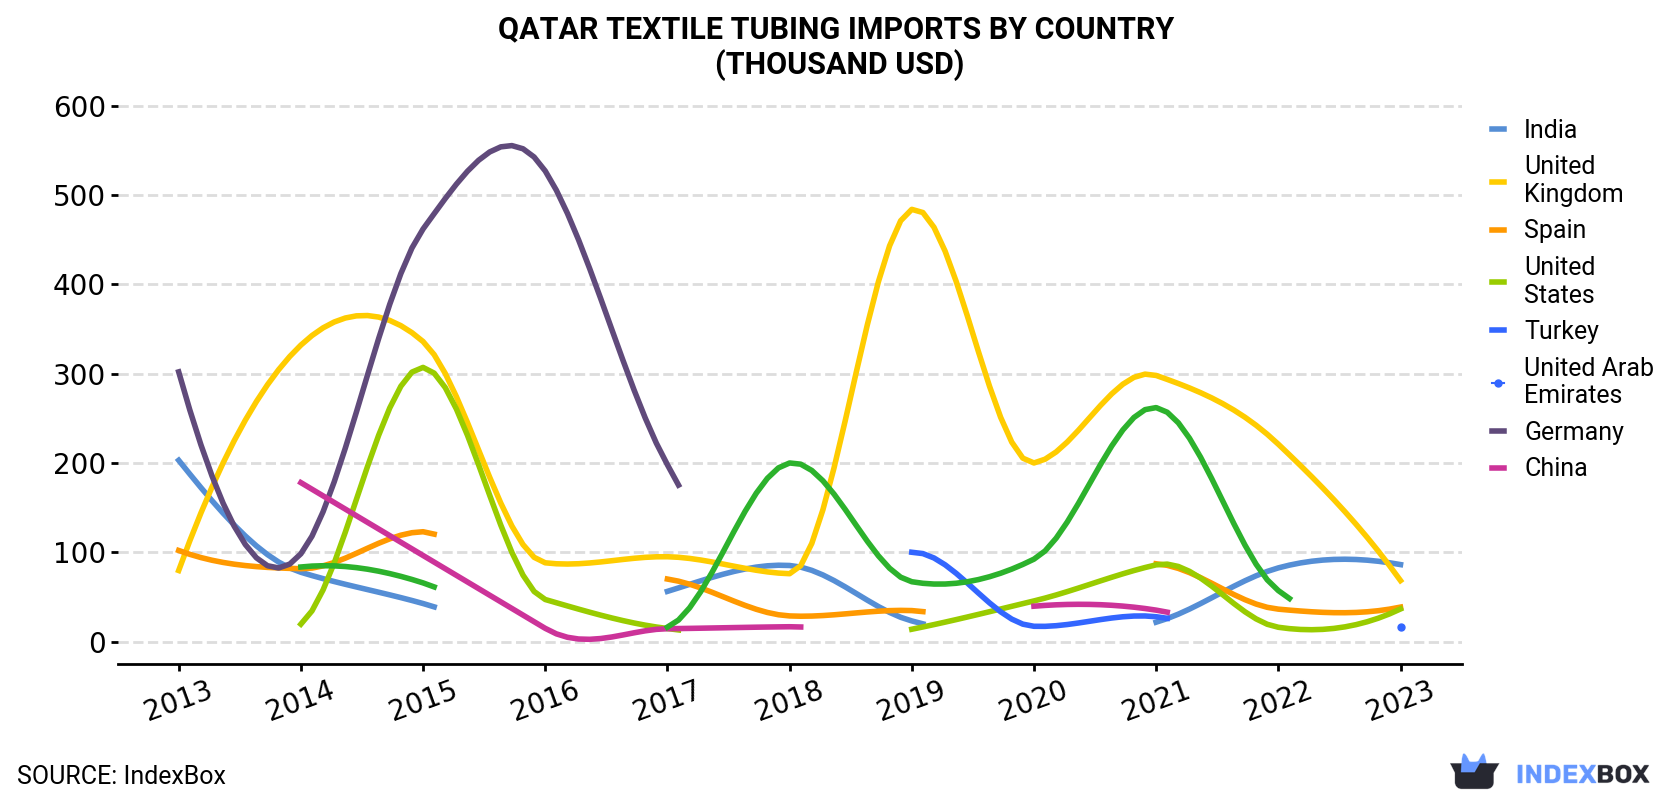 Qatar Textile Tubing Imports By Country (Thousand USD)